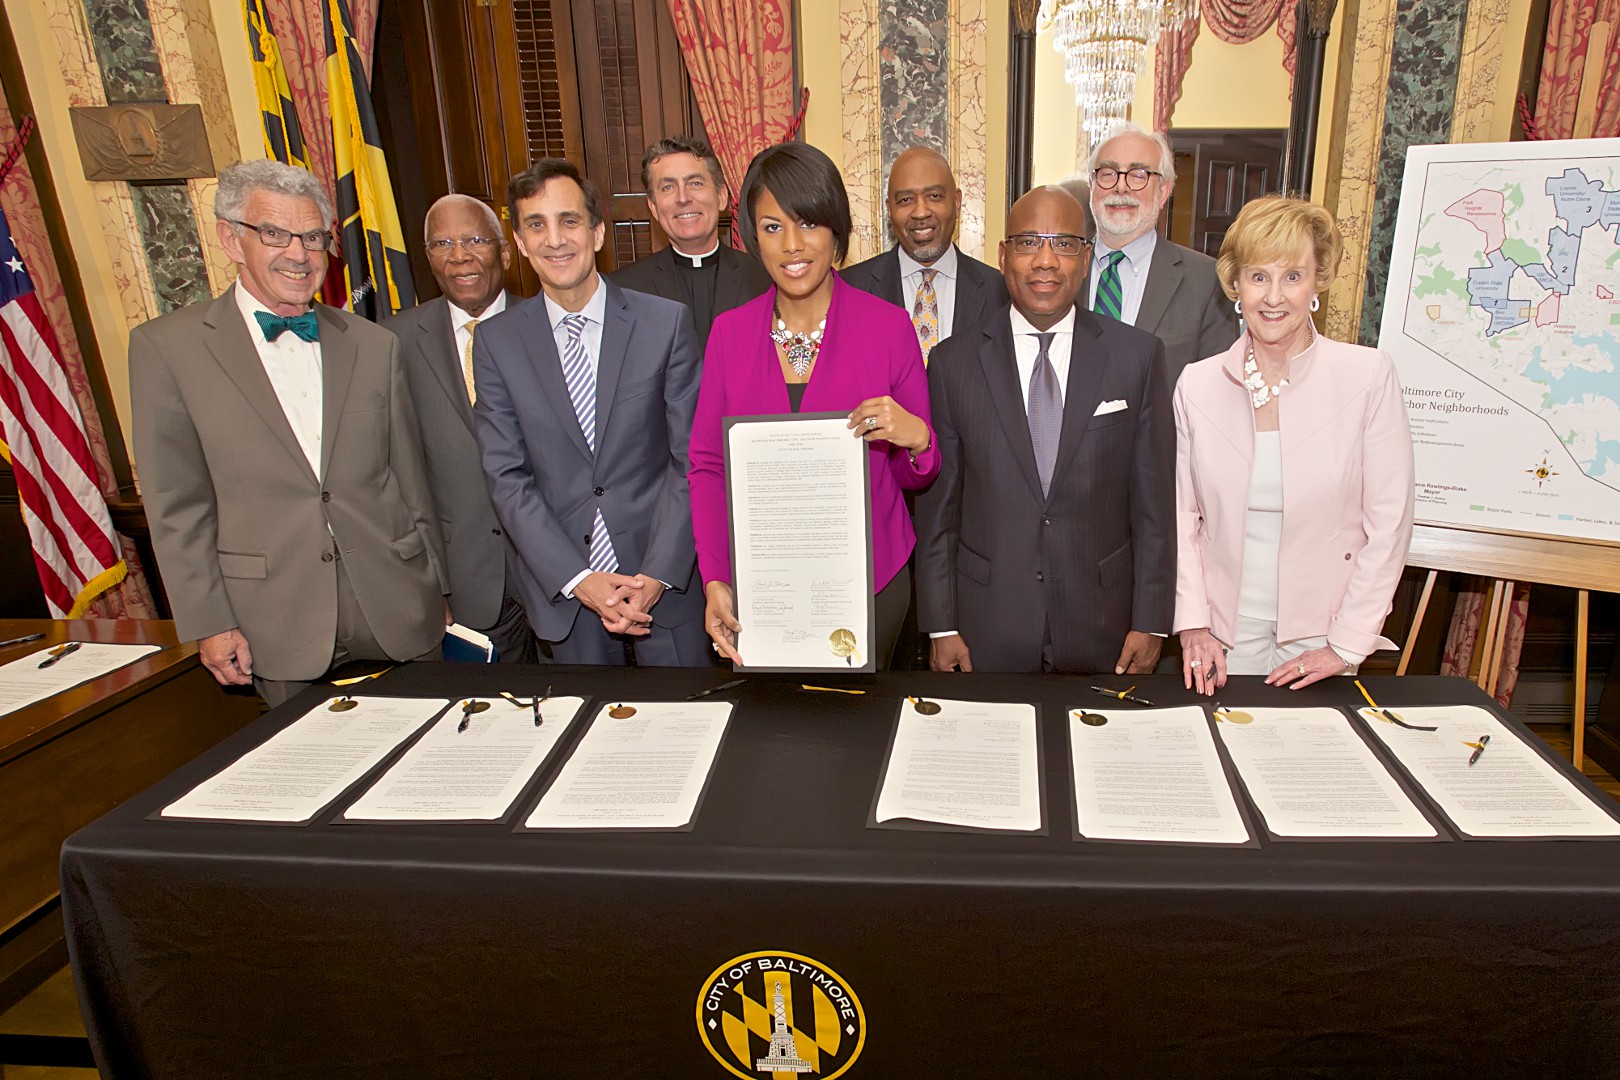 Mayor Rawlings-Blake and leaders of anchor institutions sign the Baltimore City Anchor Plan pledge